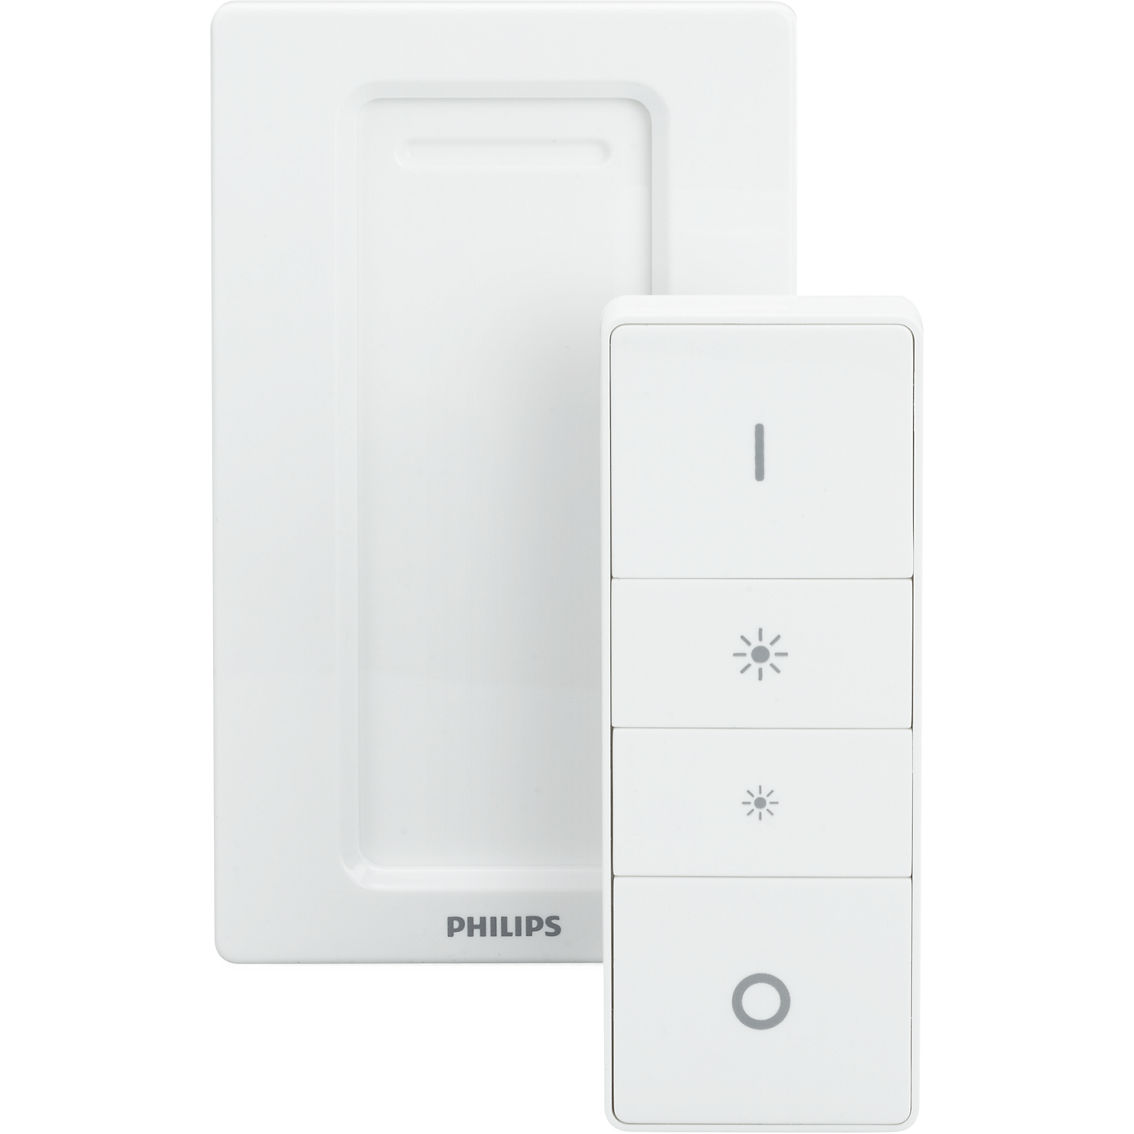 Philips Hue Dimmer Switch - Image 2 of 4